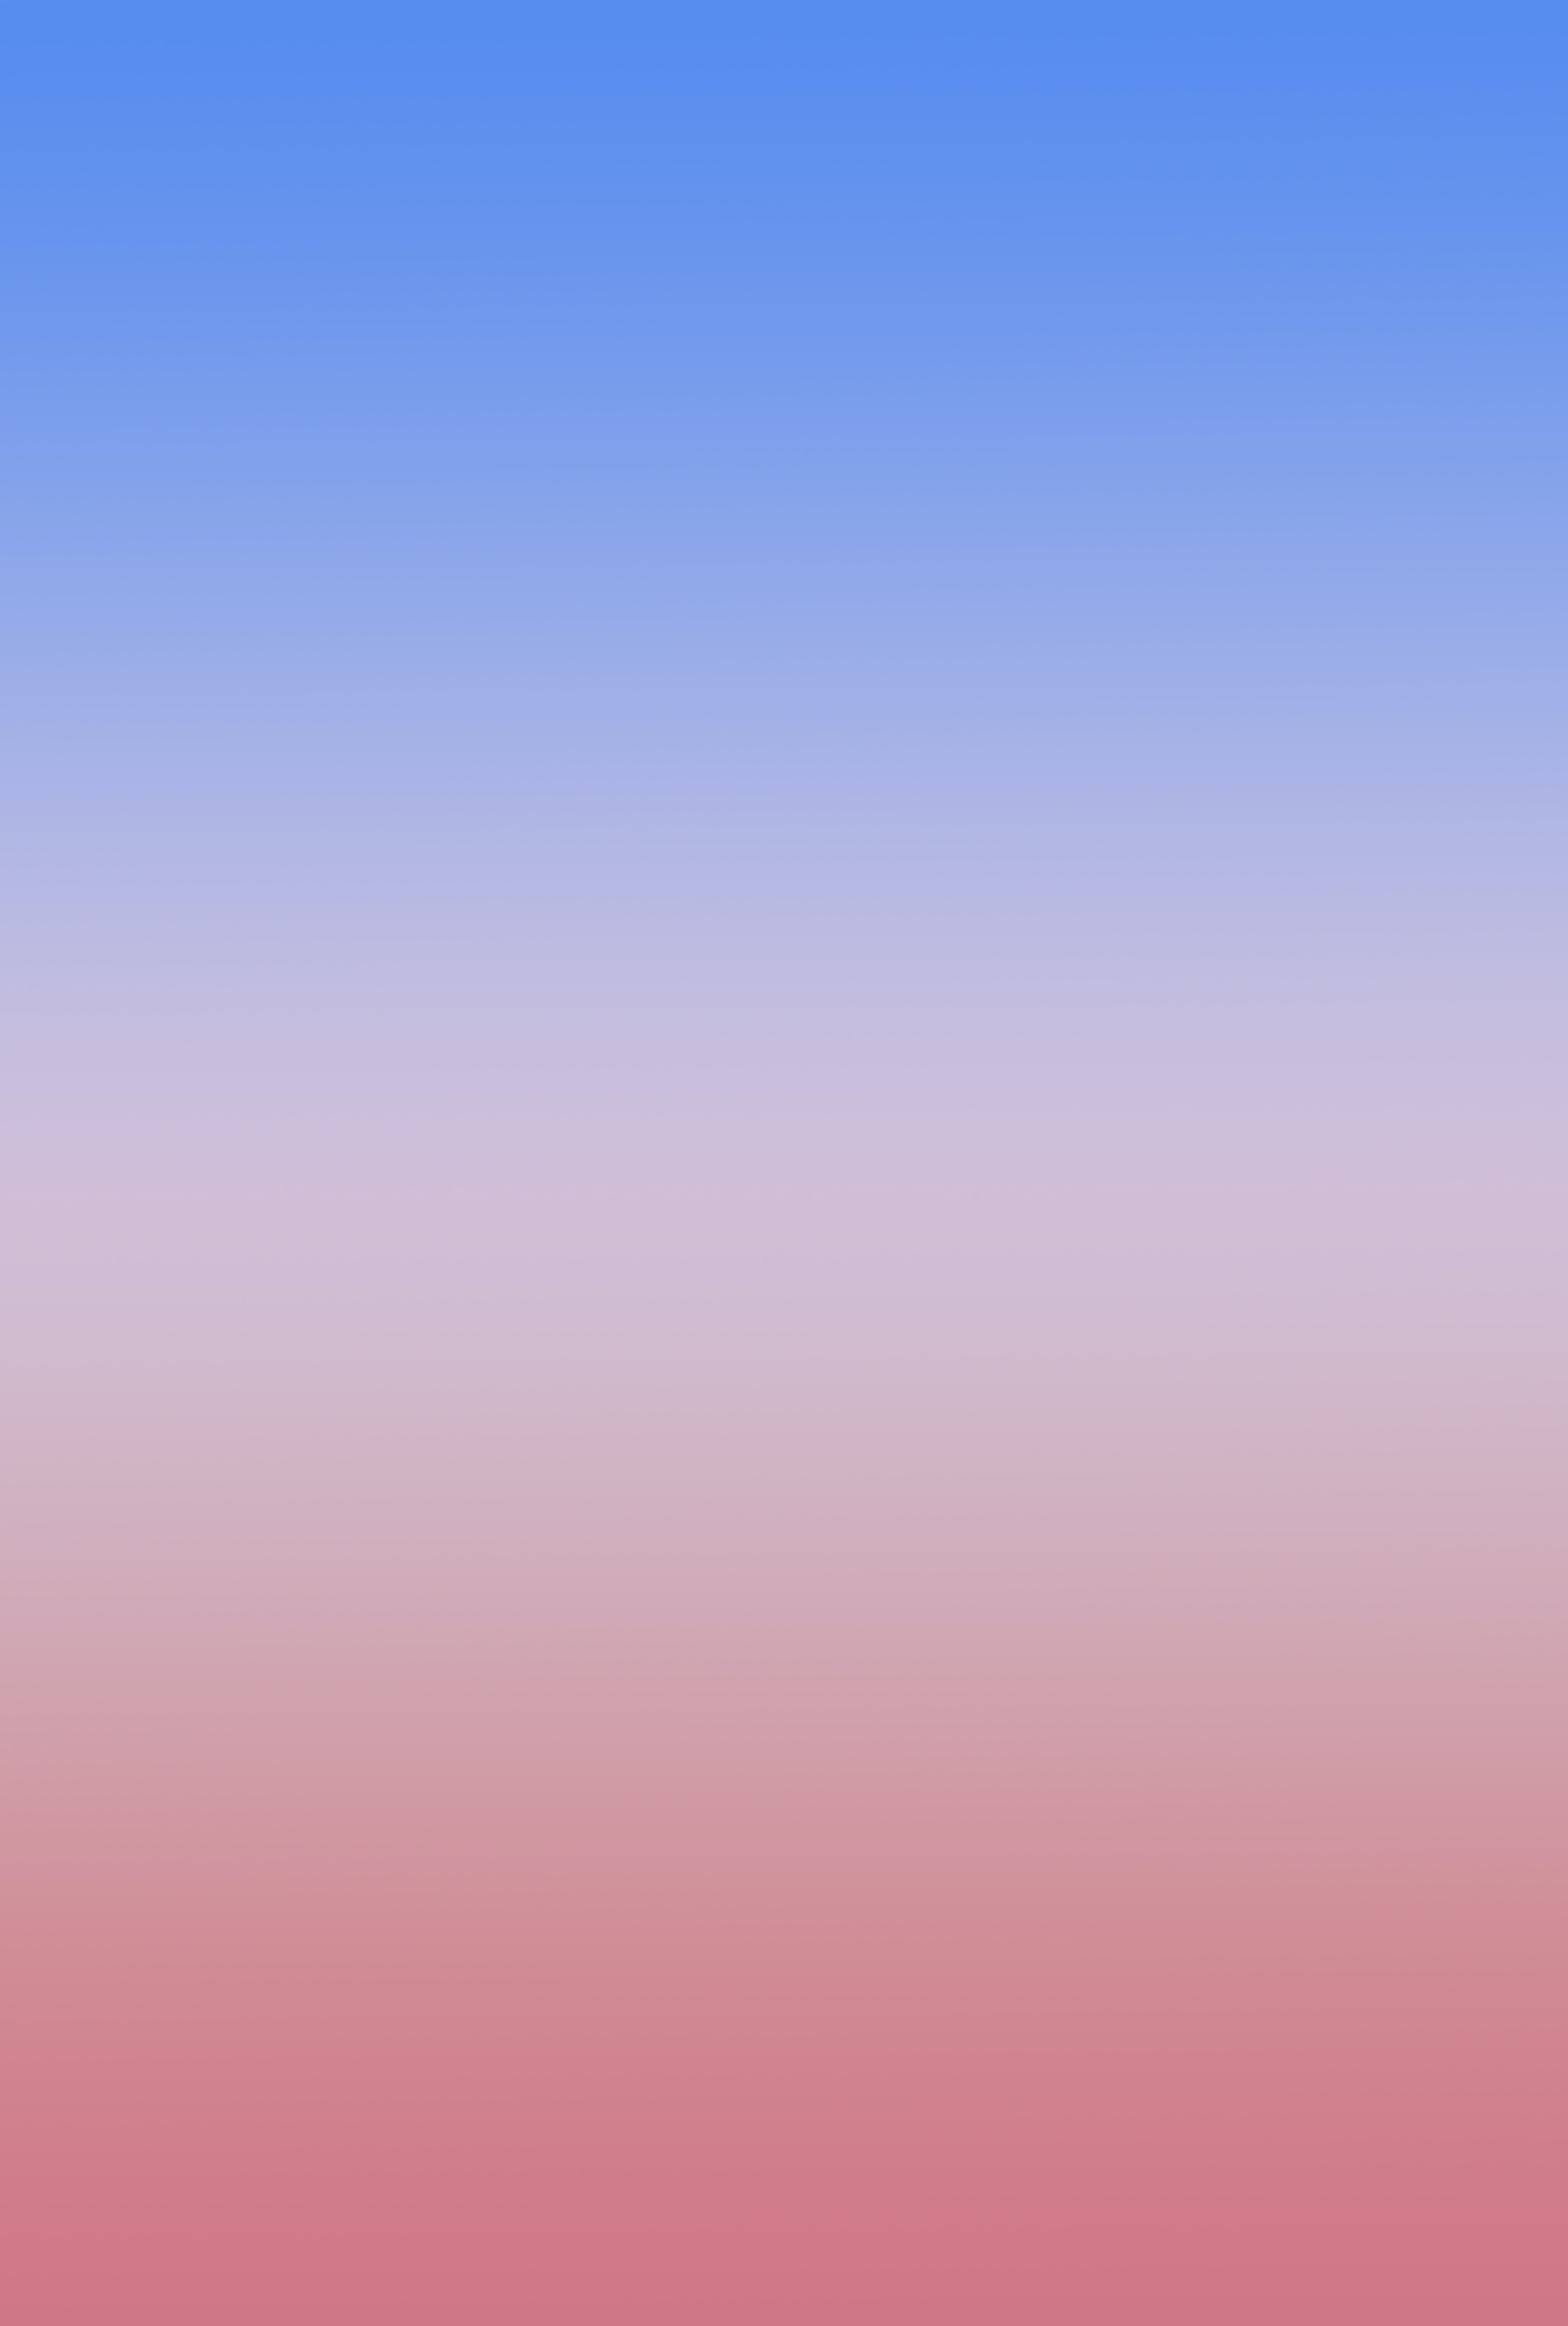 96660 Screensavers and Wallpapers Gradient for phone. Download gradient, abstract, sky, pink, blue pictures for free